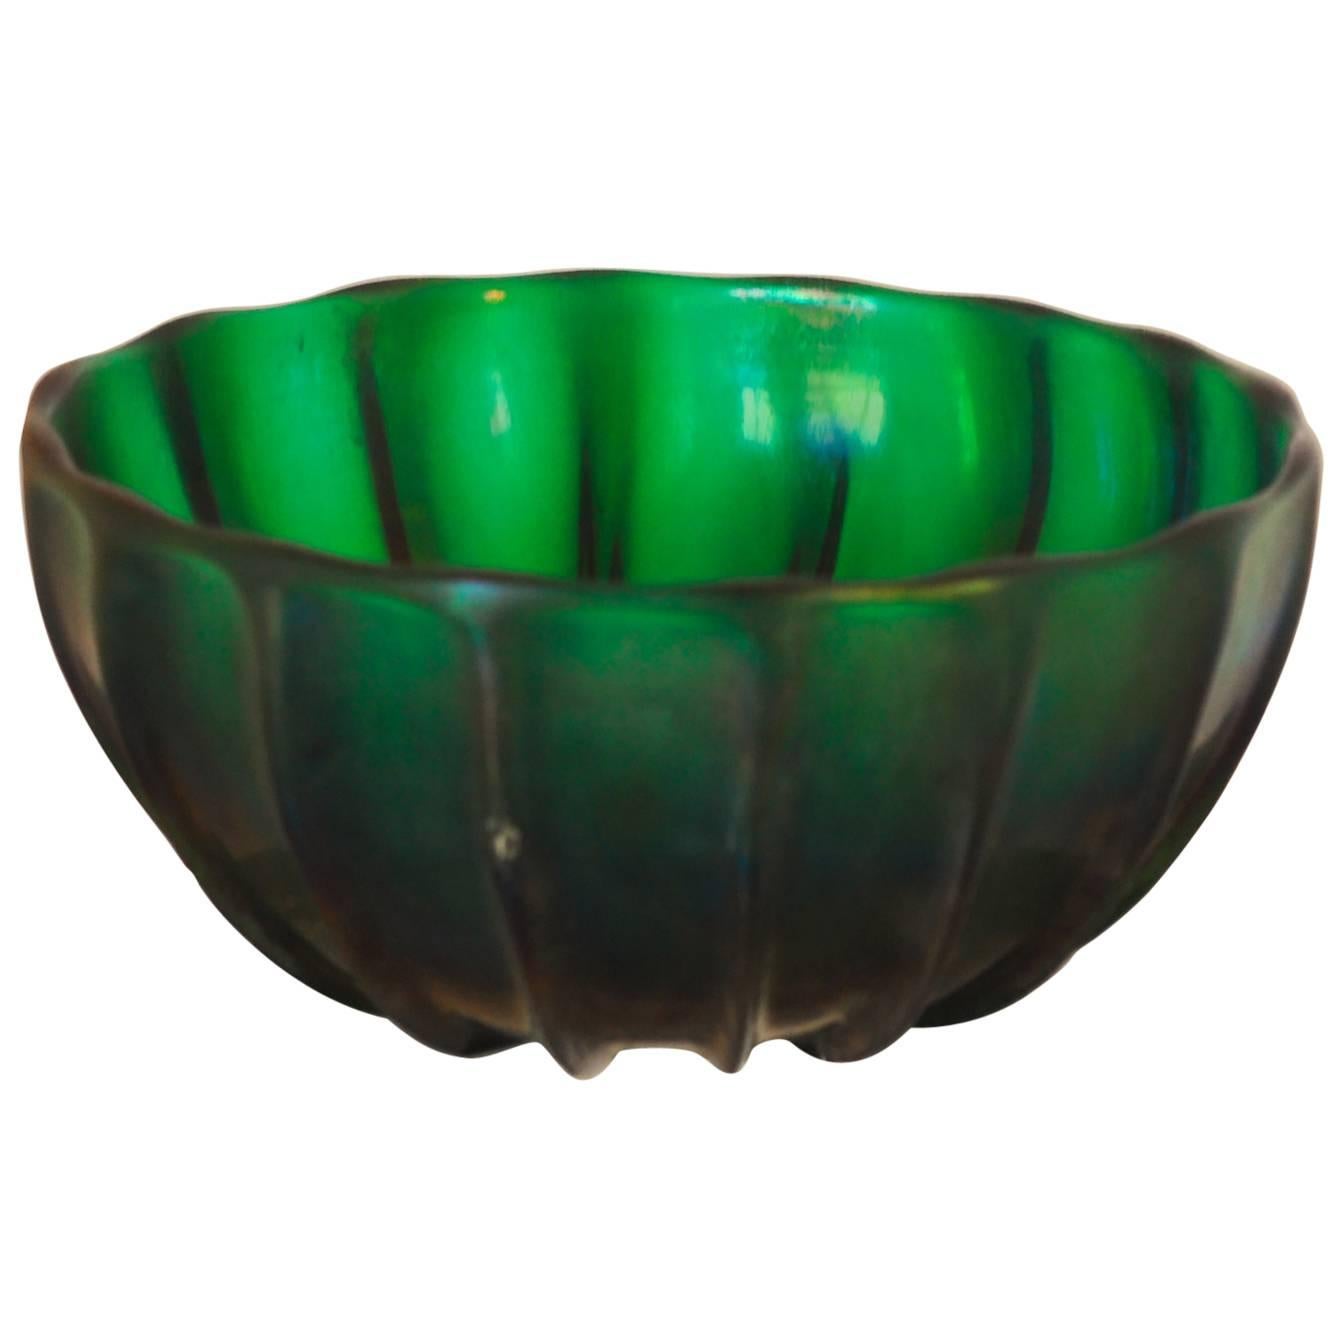 Archimede Seguso Signed Bowl, Green Glass with Iridescence, Serenella 18 Green